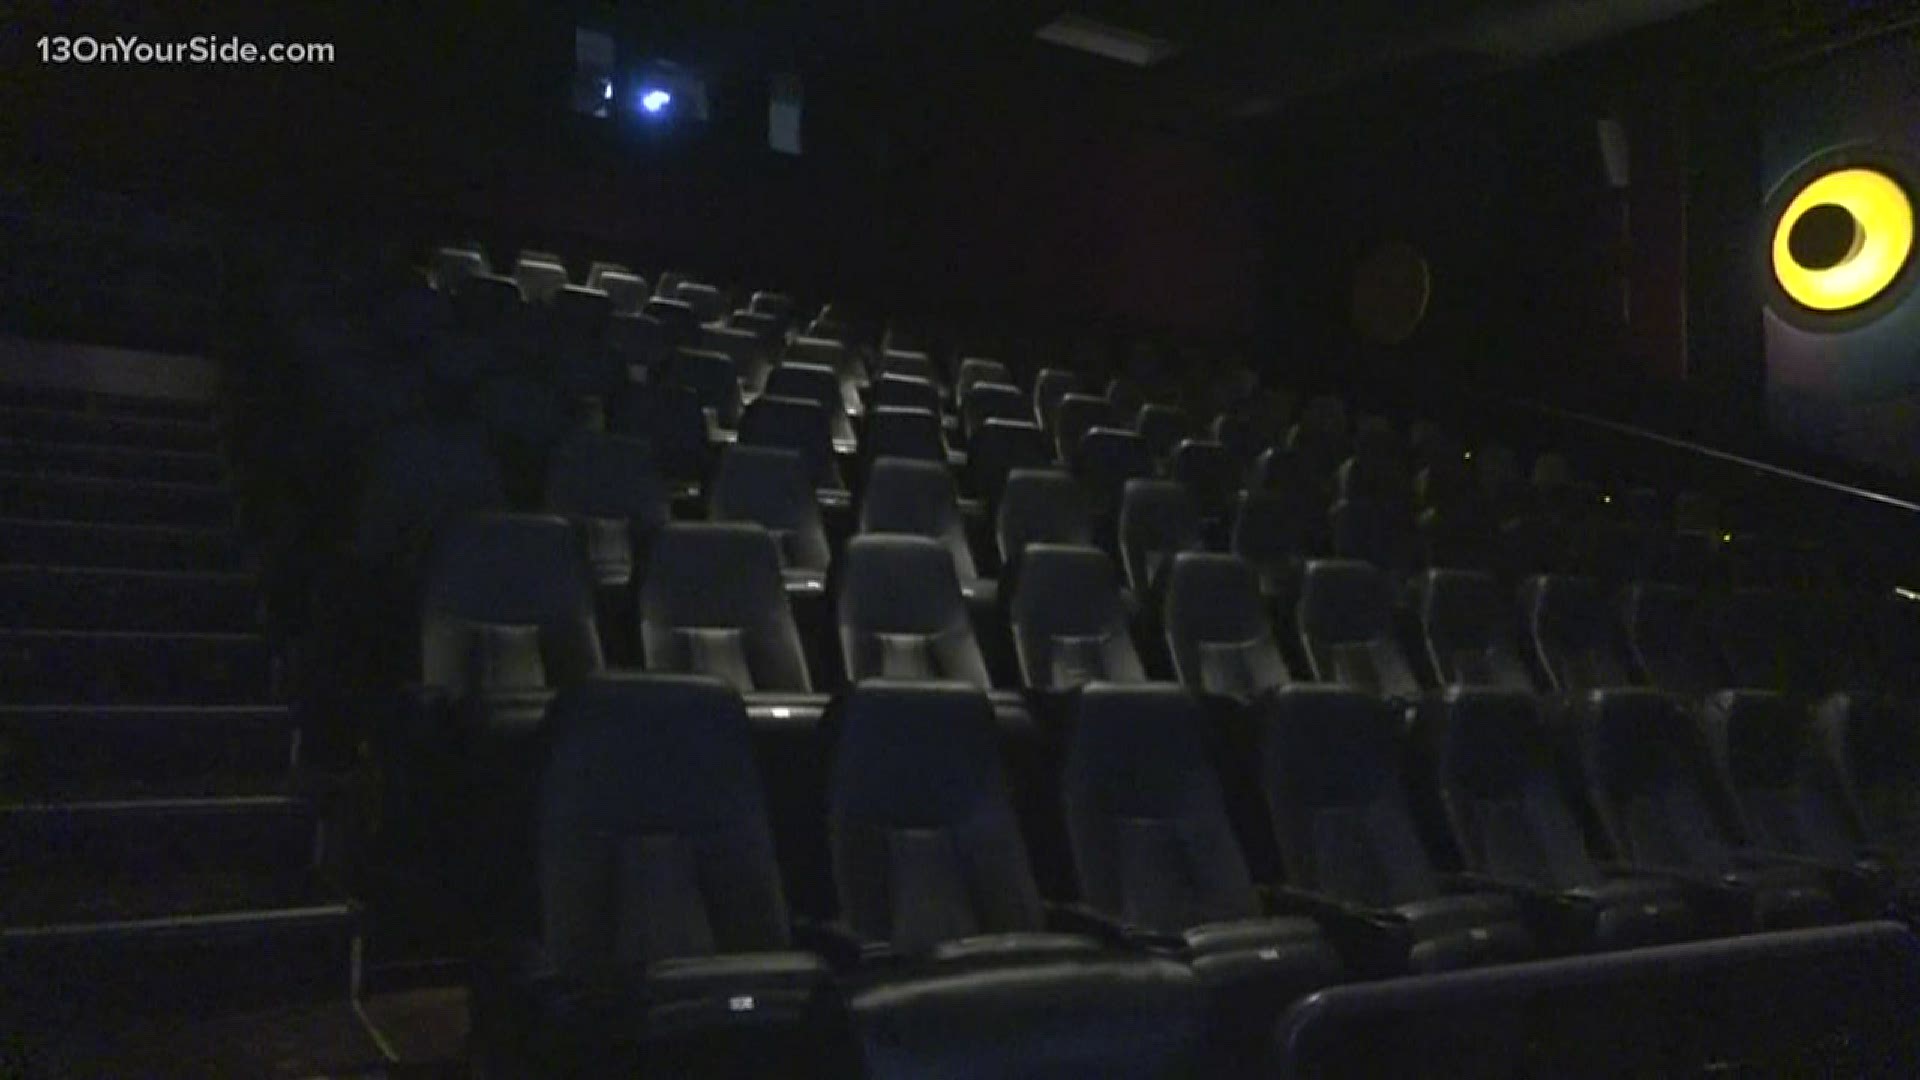 What to expect when movie theaters reopen